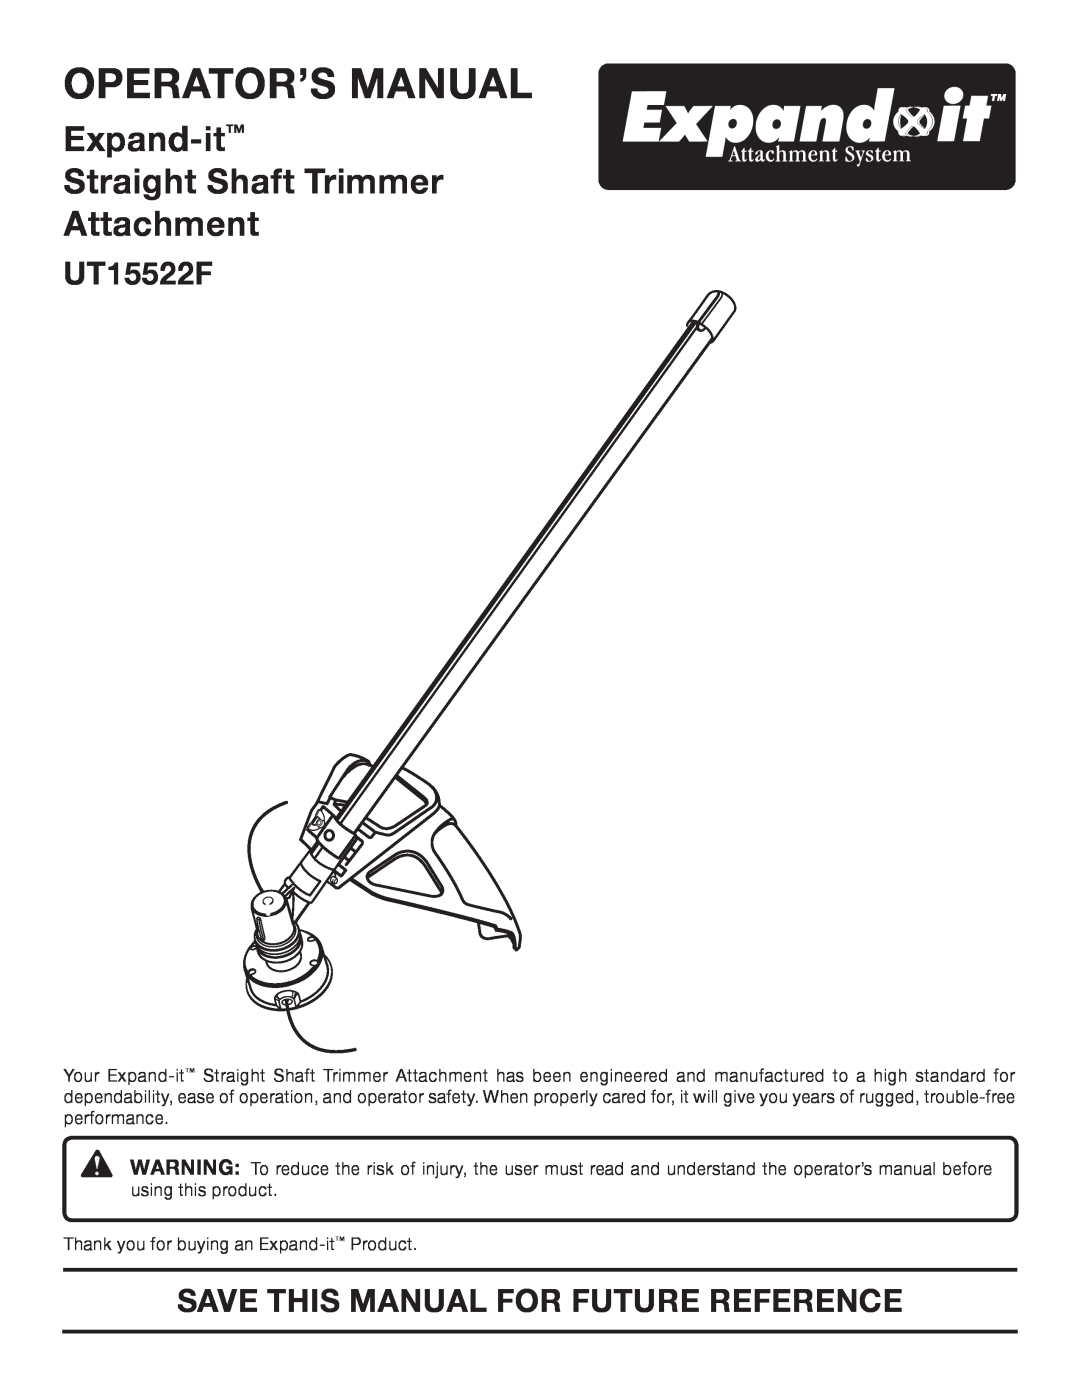 Homelite UT15522F manual Operator’S Manual, Expand-it Straight Shaft Trimmer Attachment 